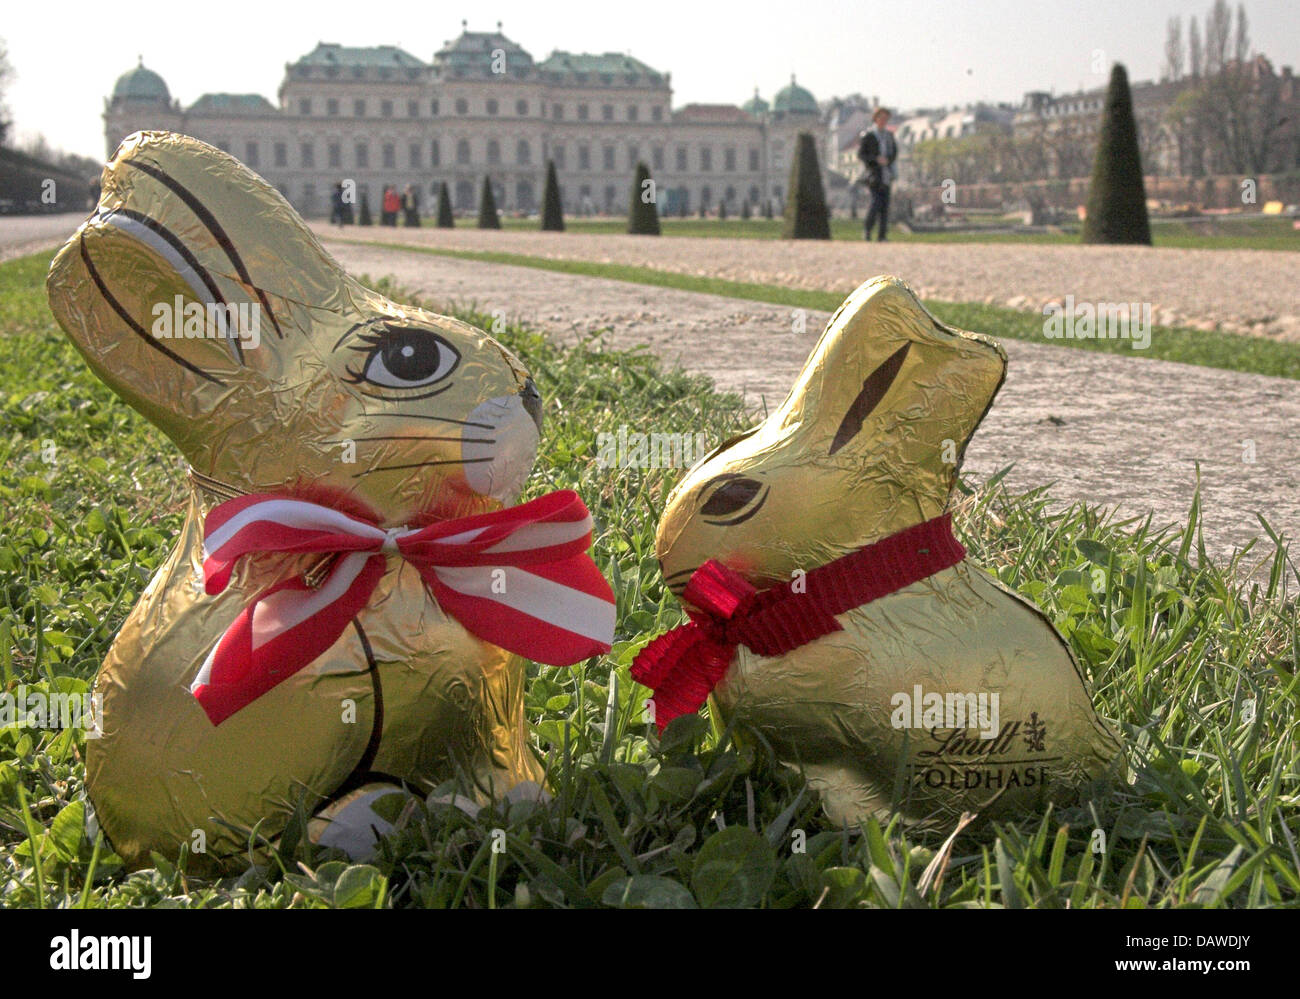 The patented chocolate Easter bunny by Lindt (R) and the disputed chocolate Easter bunny by Hauswirth (L) pictured in Vienna, Austria, Tuesday, 03 April 2007. Still no end is in sight in the dispute over the Easter bunnies. An interlocutory injunction issued in 2004 stopped the production of the Hauswirth chocolate bunny but two judicial authorities did not come to a decision yet.  Stock Photo